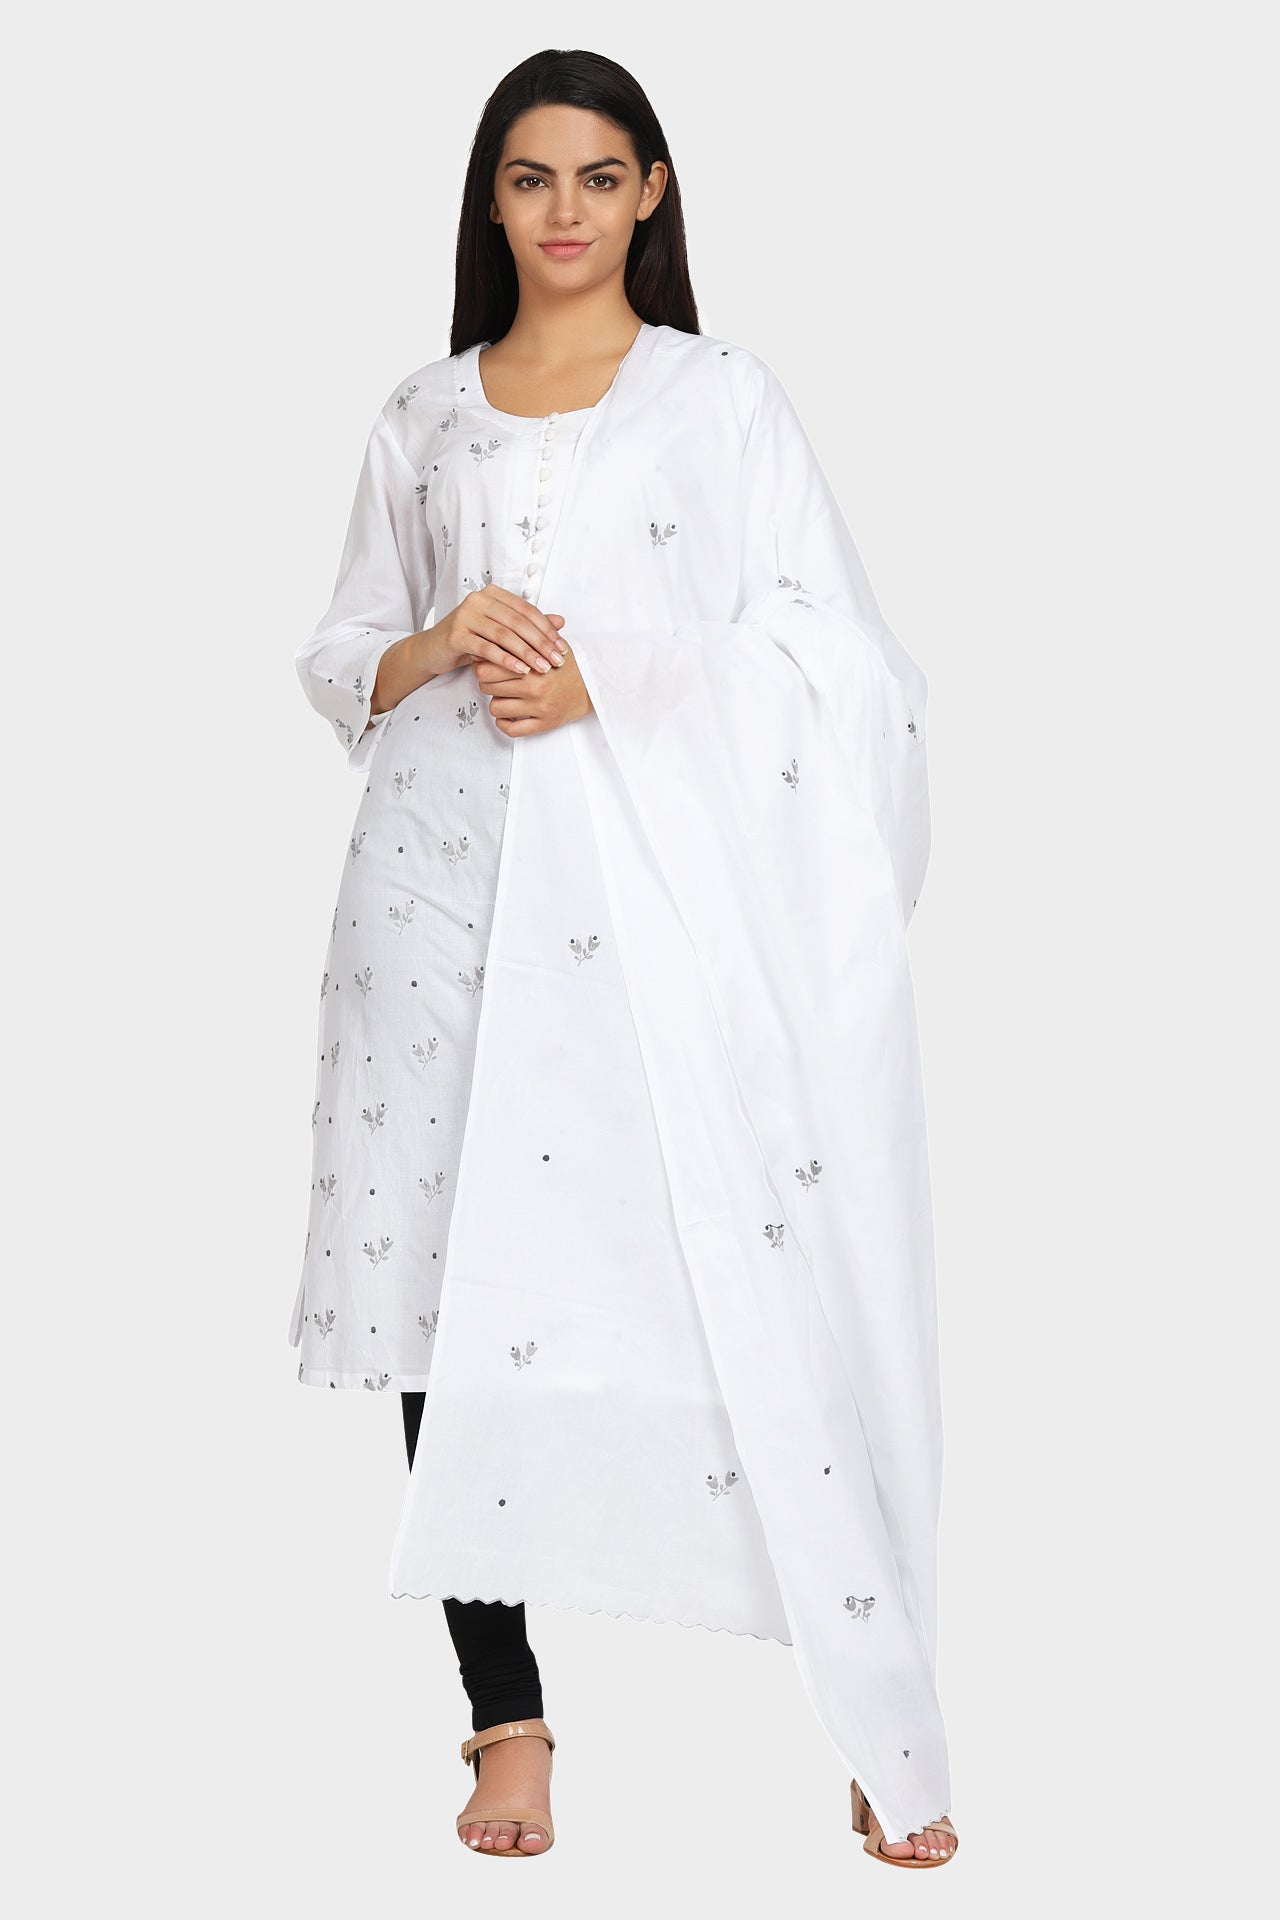 White Pure Cotton Dupatta Featuring Contrast Curvy Ends on Two Sides